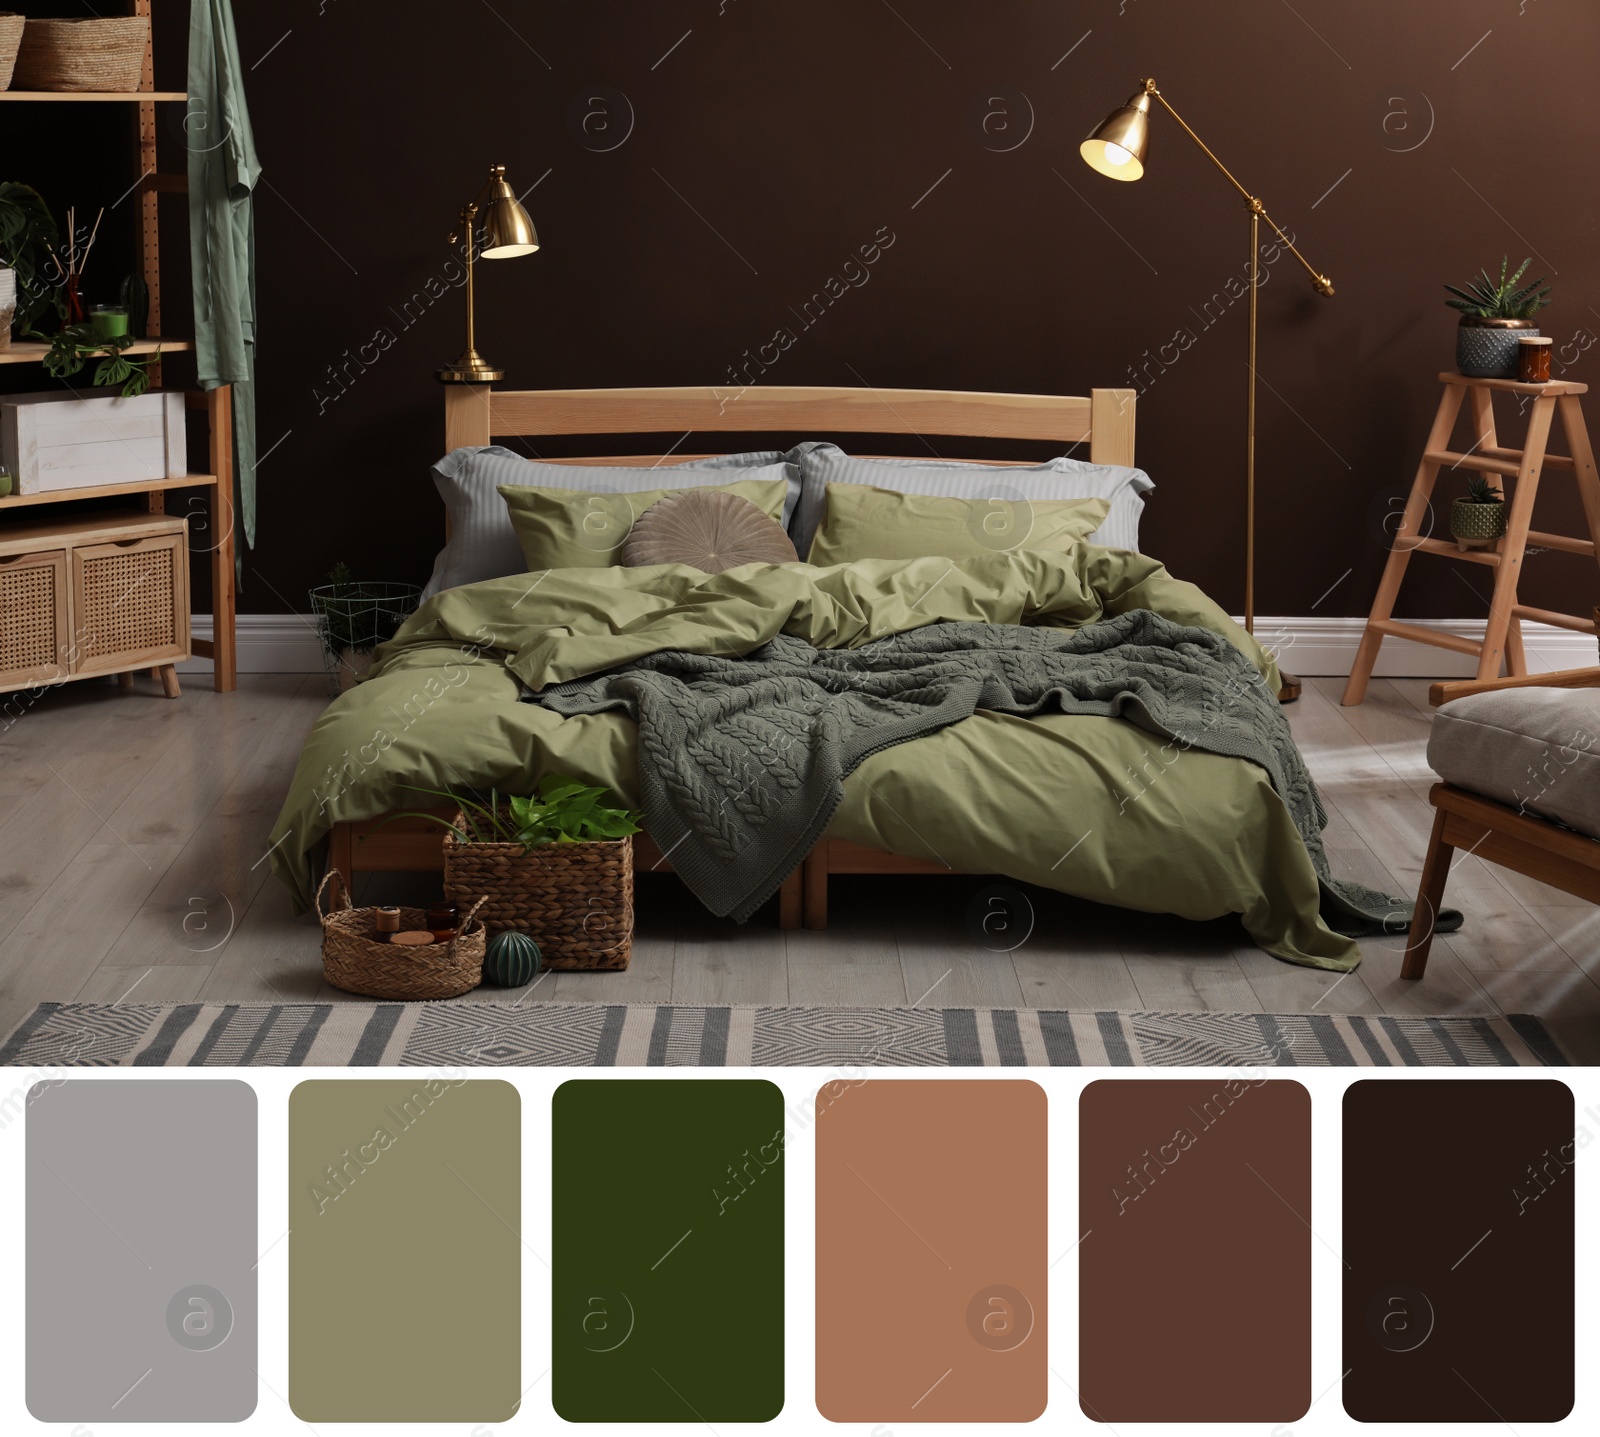 Image of Color palette and photo of stylish bedroom interior. Collage